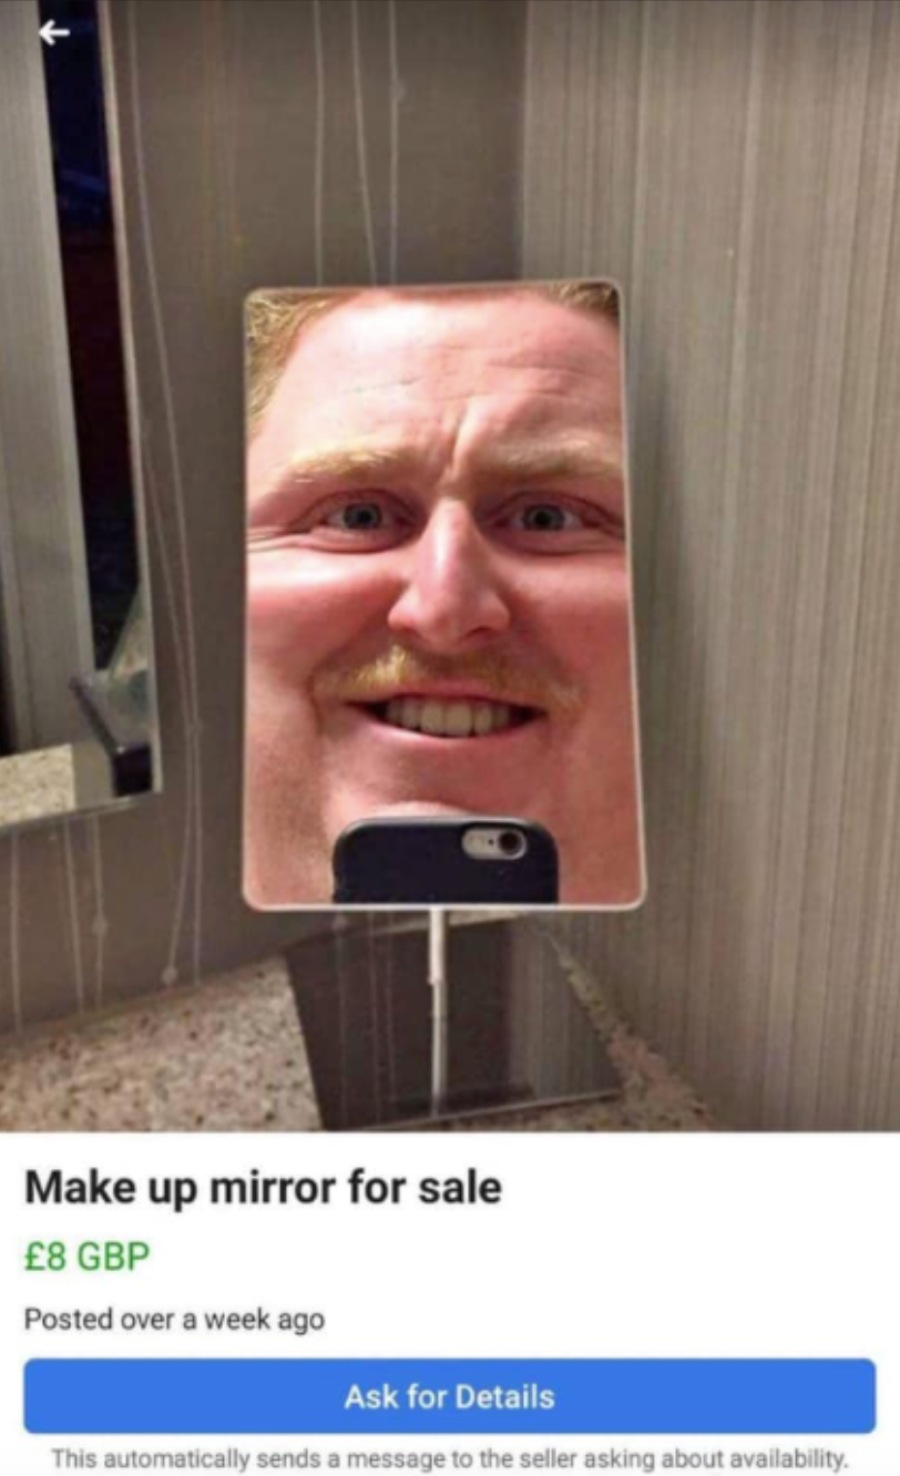 People selling mirrors: 25 cursed pictures of people selling mirrors online